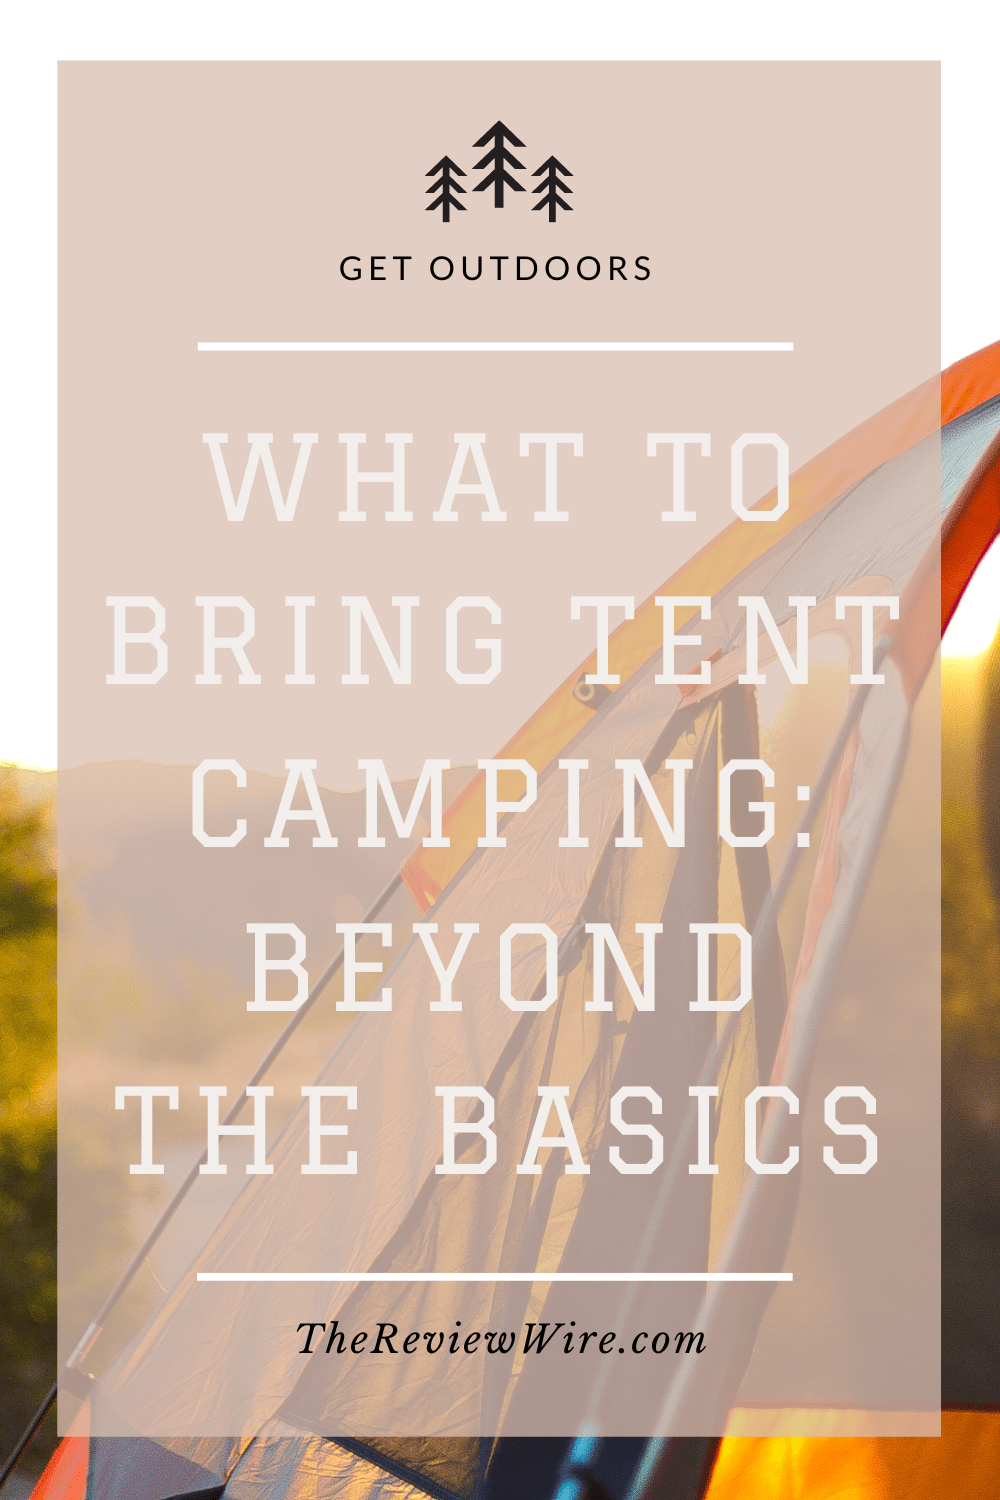 The Review Wire_What To Bring Tent Camping Beyond the Basics